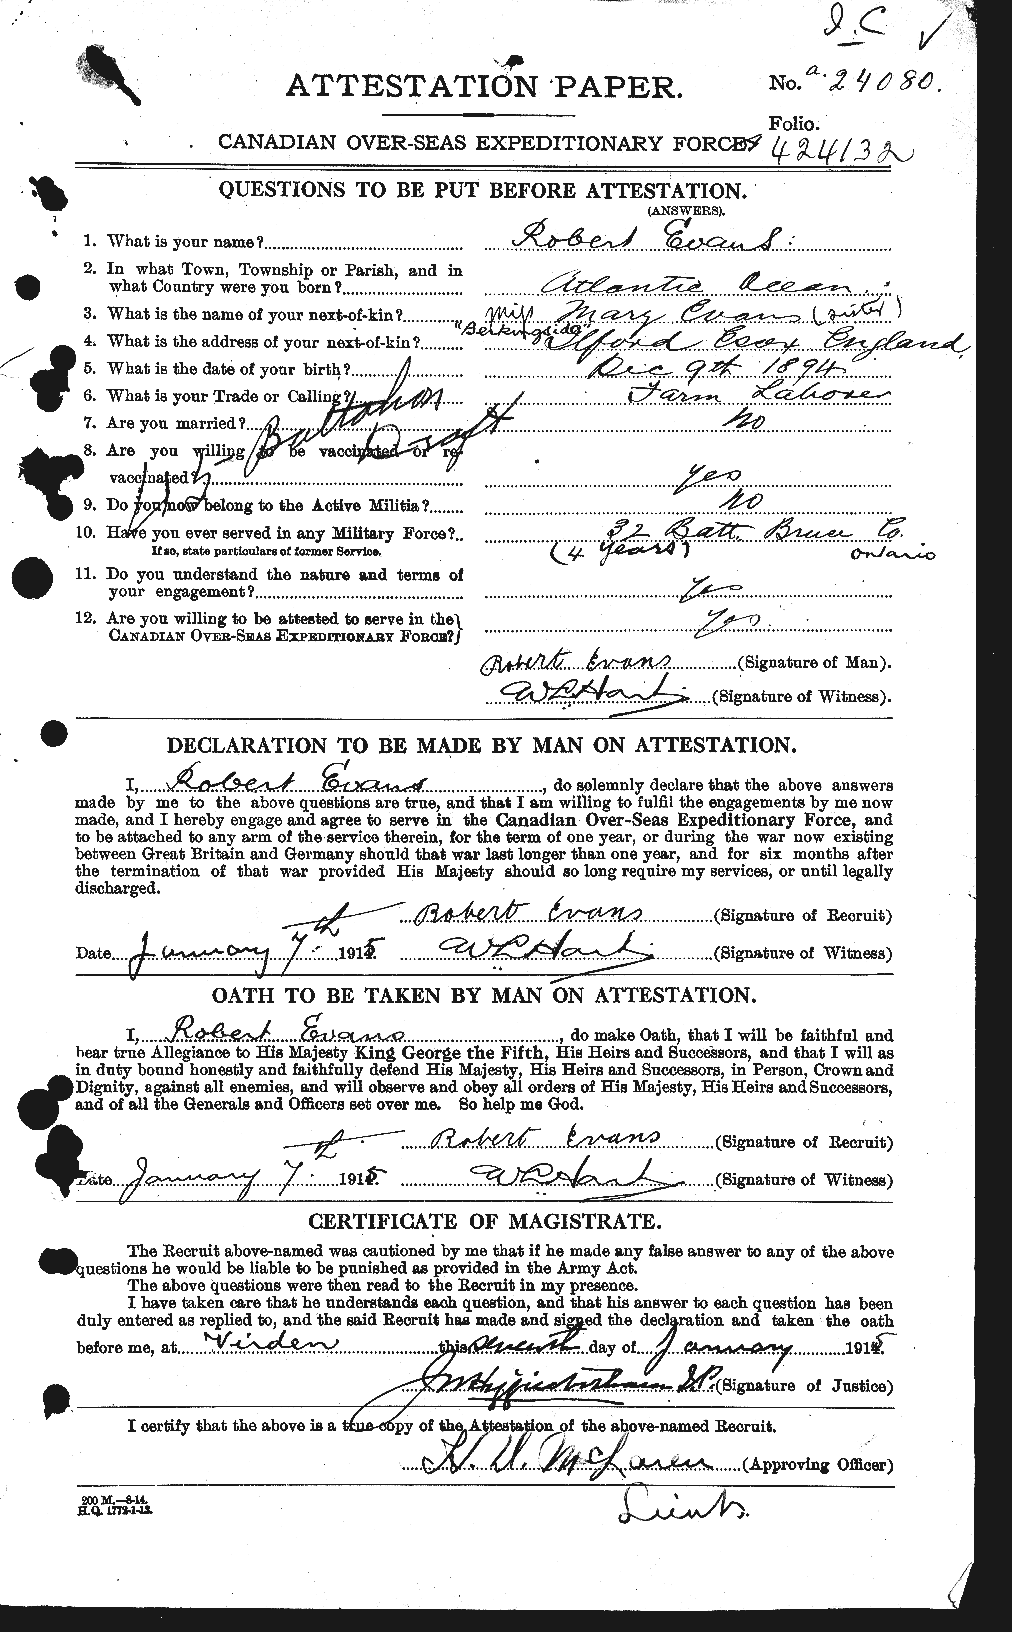 Personnel Records of the First World War - CEF 313285a